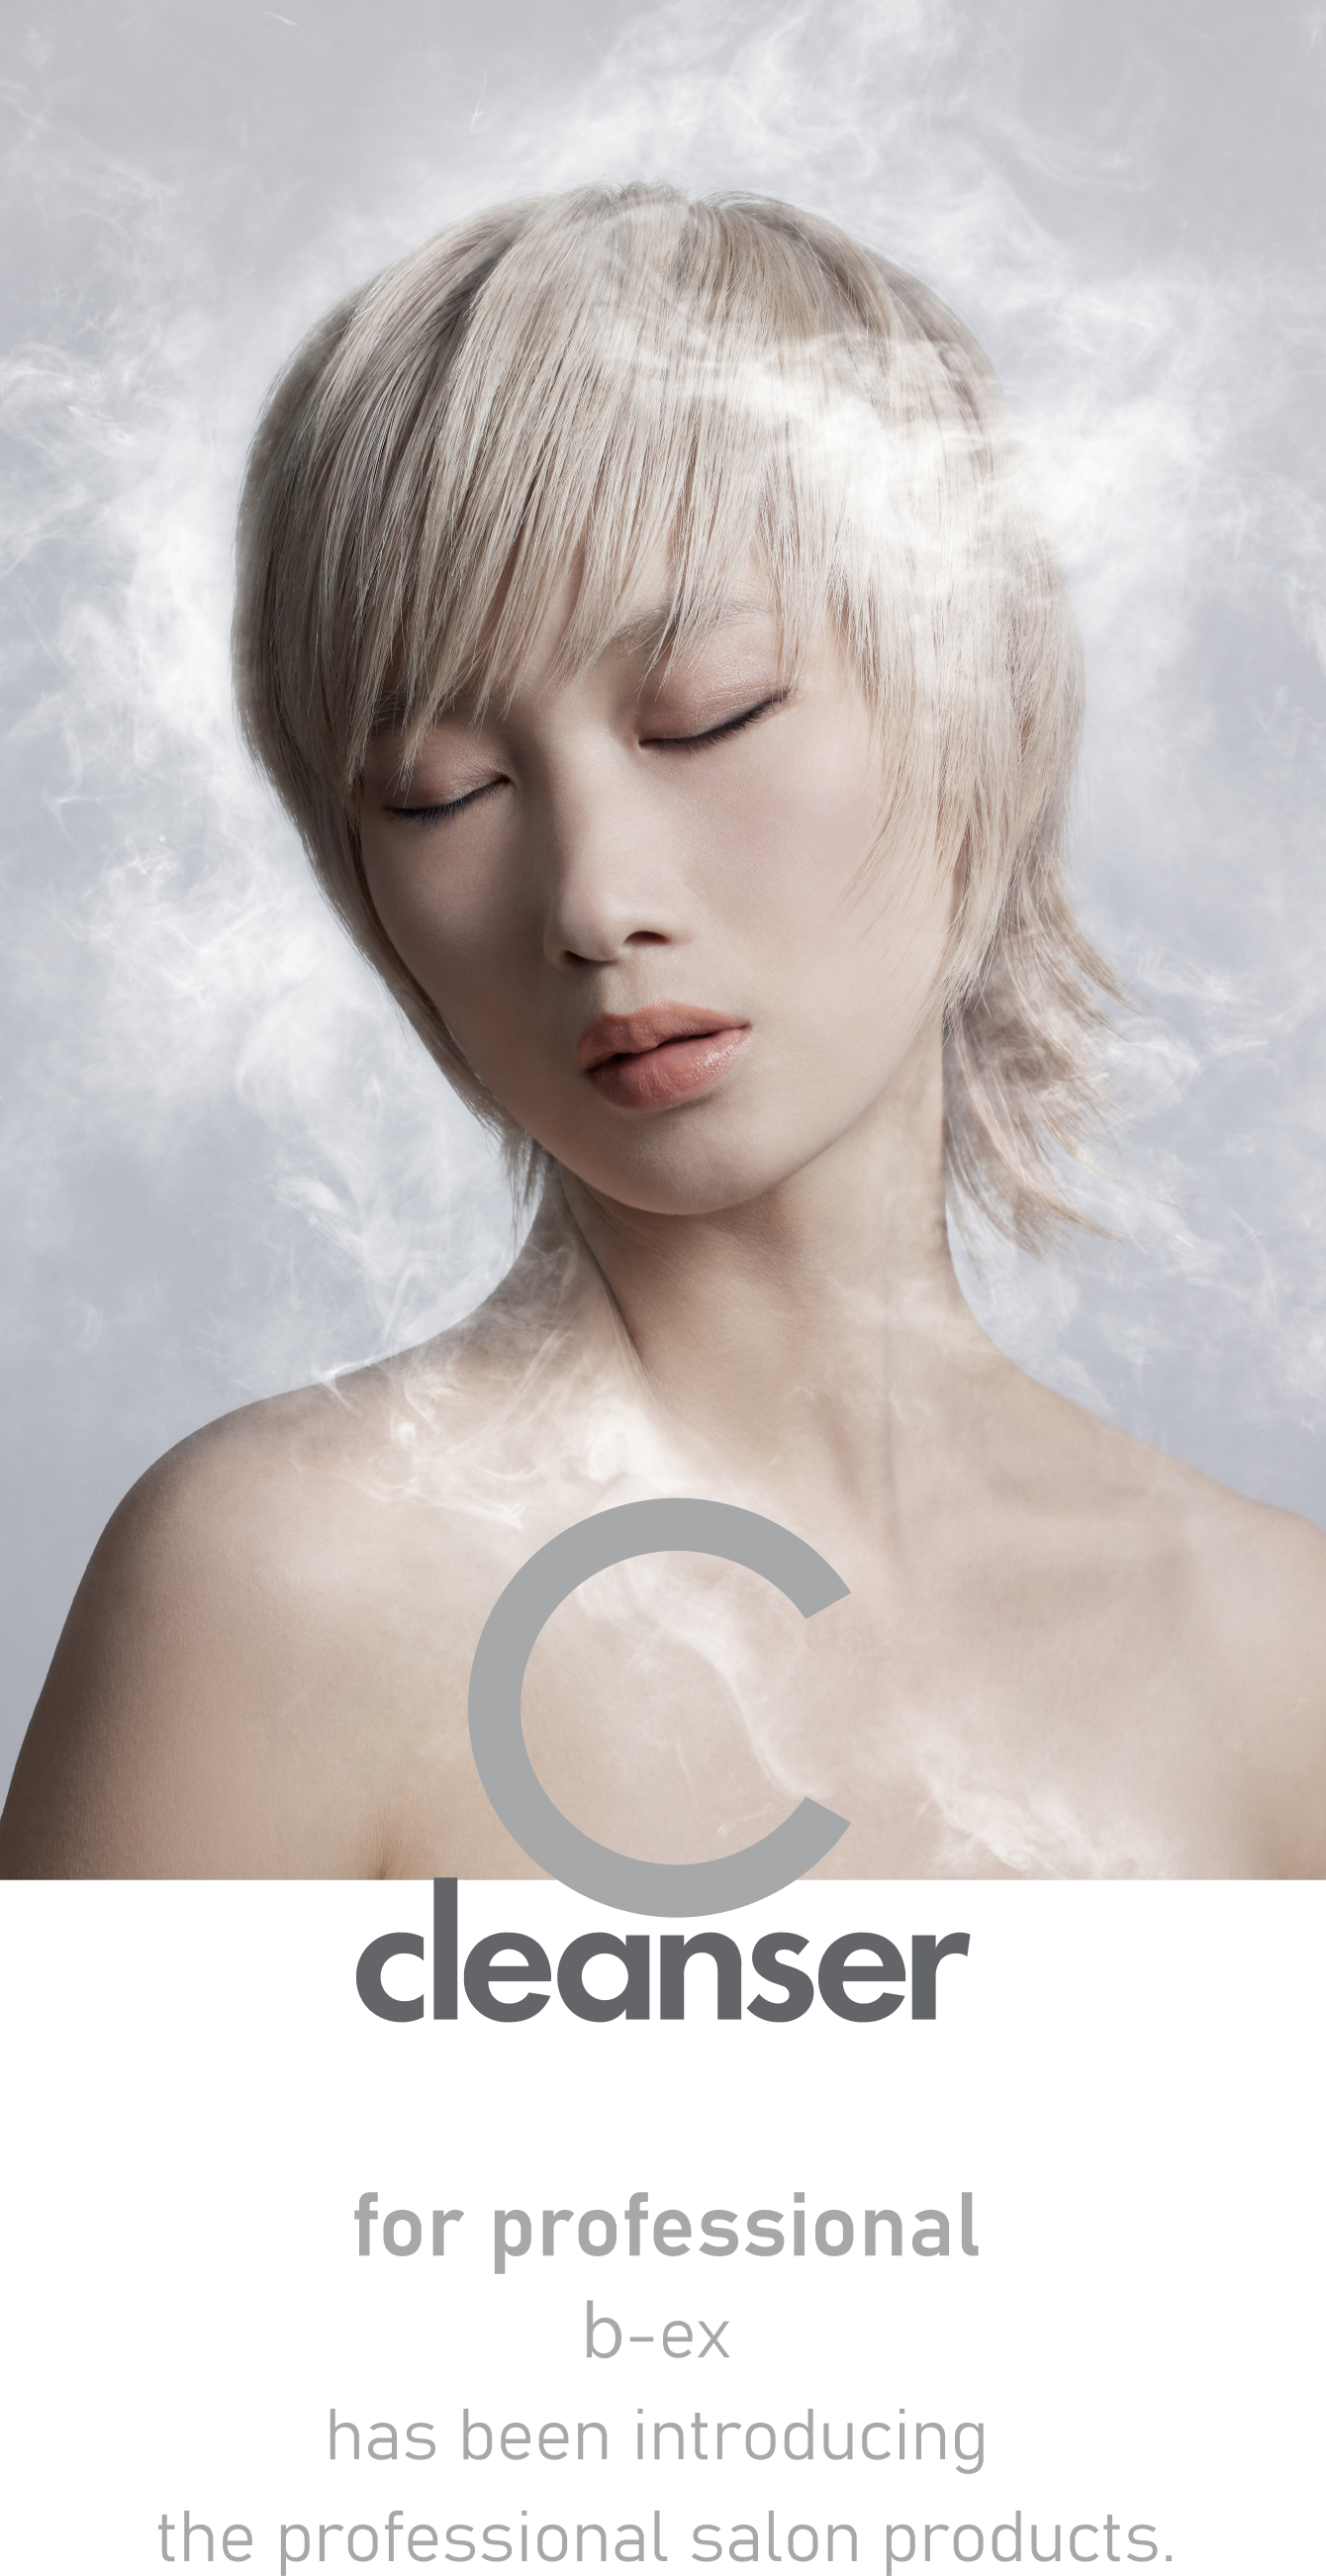 c cleanser | その差、歴然。